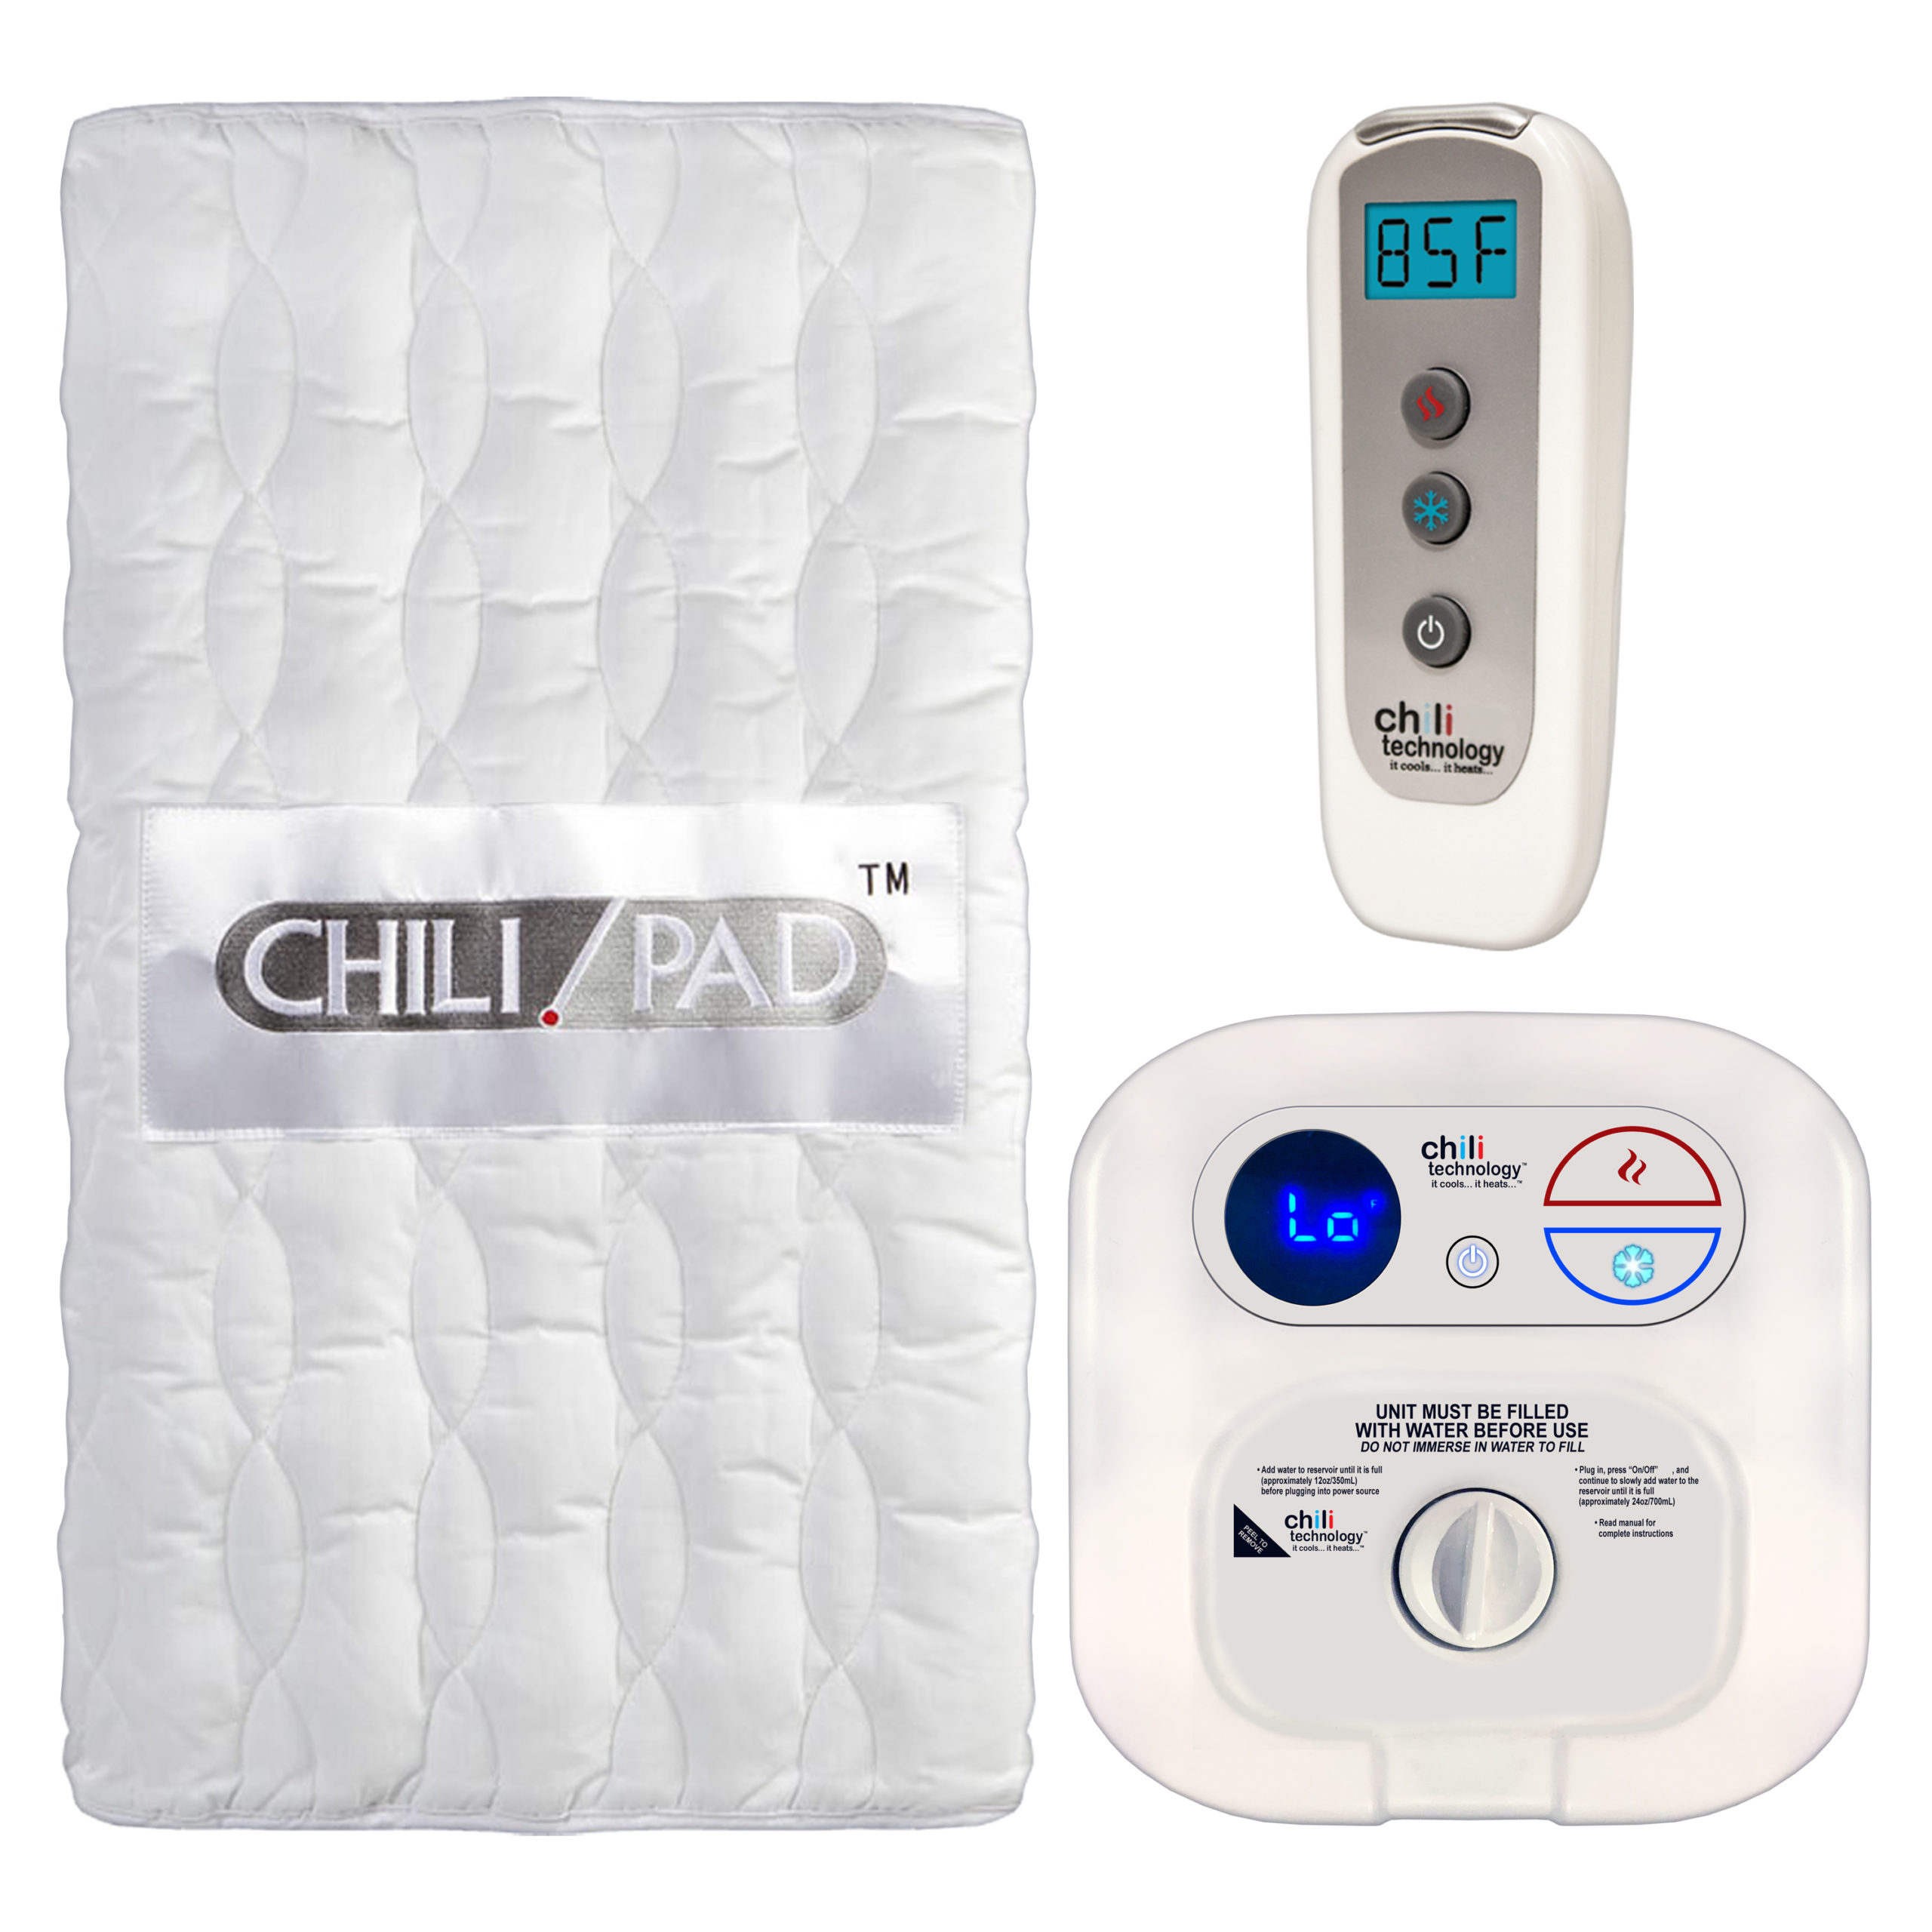 Wake Up in Sweat - Chilipad|Temperature|Mattress|Cube|Sleep|Bed|Water|System|Pad|Ooler|Control|Unit|Night|Bedjet|Technology|Side|Air|Product|Review|Body|Time|Degrees|Noise|Price|Pod|Tubes|Heat|Device|Cooling|Room|King|App|Features|Size|Cover|Sleepers|Sheets|Energy|Warranty|Quality|Mattress Pad|Control Unit|Cube Sleep System|Sleep Pod|Distilled Water|Remote Control|Sleep System|Desired Temperature|Water Tank|Chilipad Cube|Chili Technology|Deep Sleep|Pro Cover|Ooler Sleep System|Hydrogen Peroxide|Cool Mesh|Sleep Temperature|Fitted Sheet|Pod Pro|Sleep Quality|Smartphone App|Sleep Systems|Chilipad Sleep System|New Mattress|Sleep Trial|Full Refund|Mattress Topper|Body Heat|Air Flow|Chilipad Review